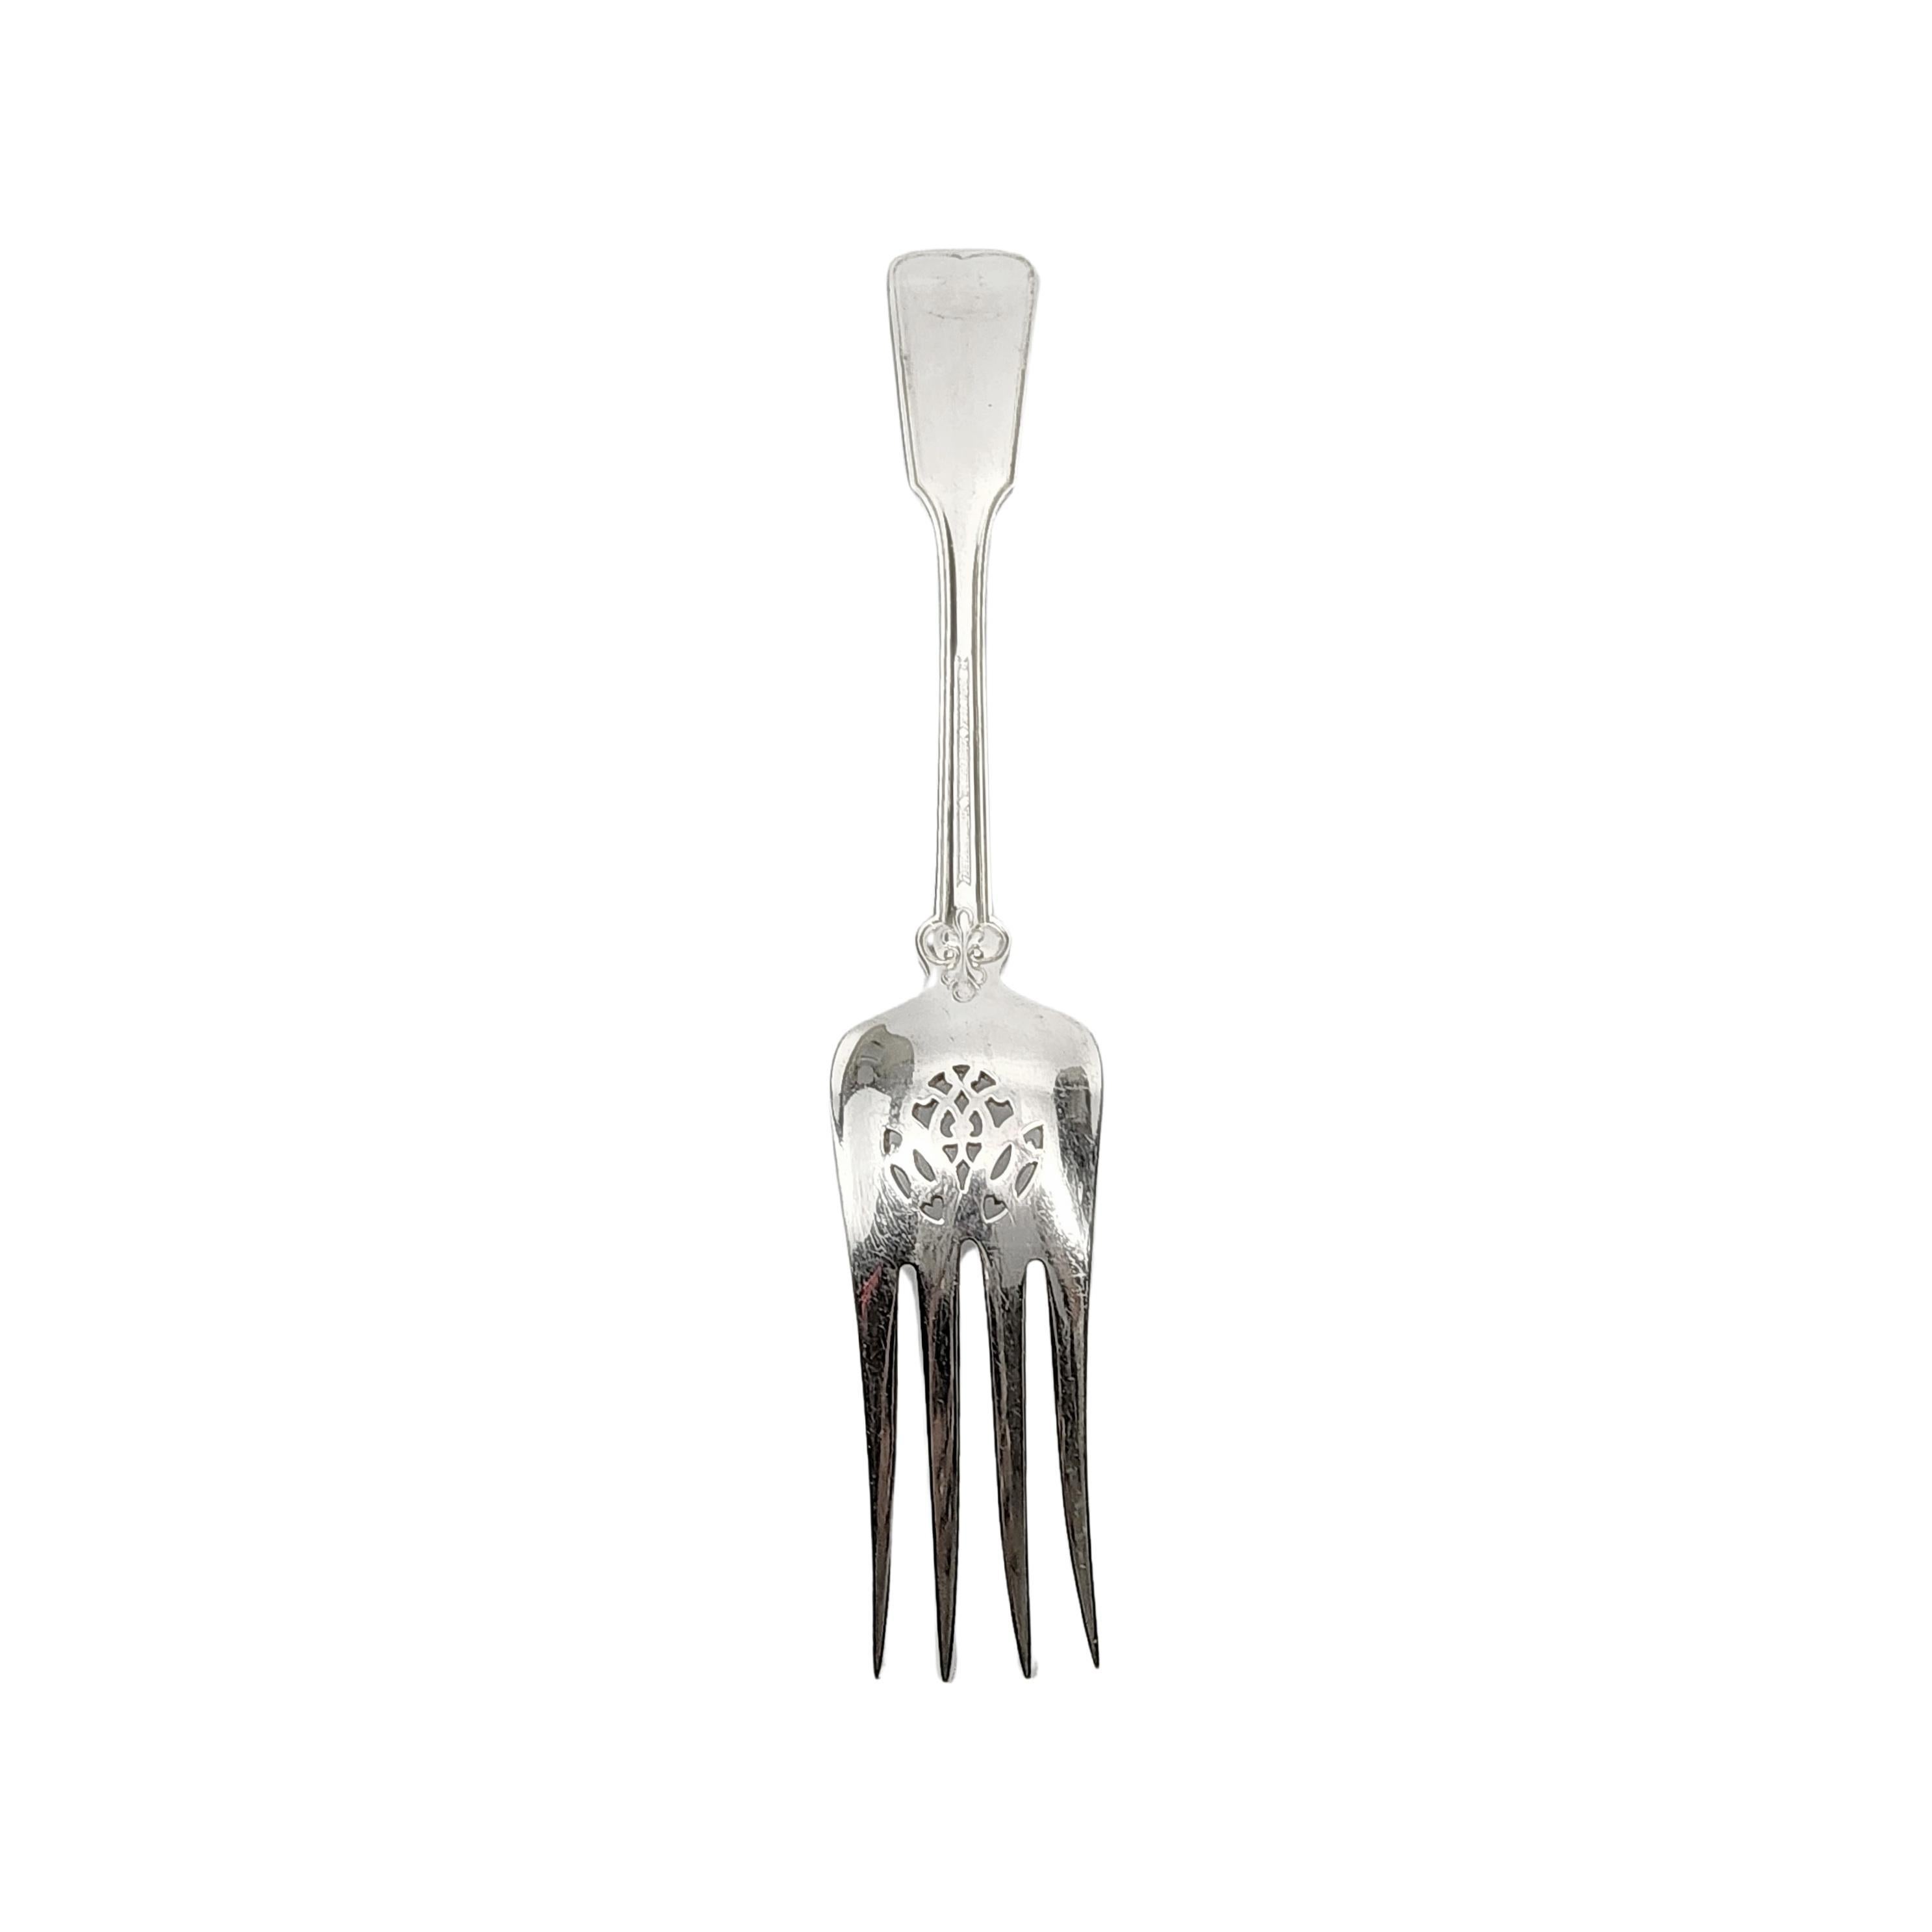 Sterling silver cold meat fork in the Shell & Thread pattern by Tiffany & Co with monogram.

Monogram appears to be C

The Shell & Thread pattern was introduced in 1905, and continues to be one of the most in-demand of Tiffany's classic patterns.